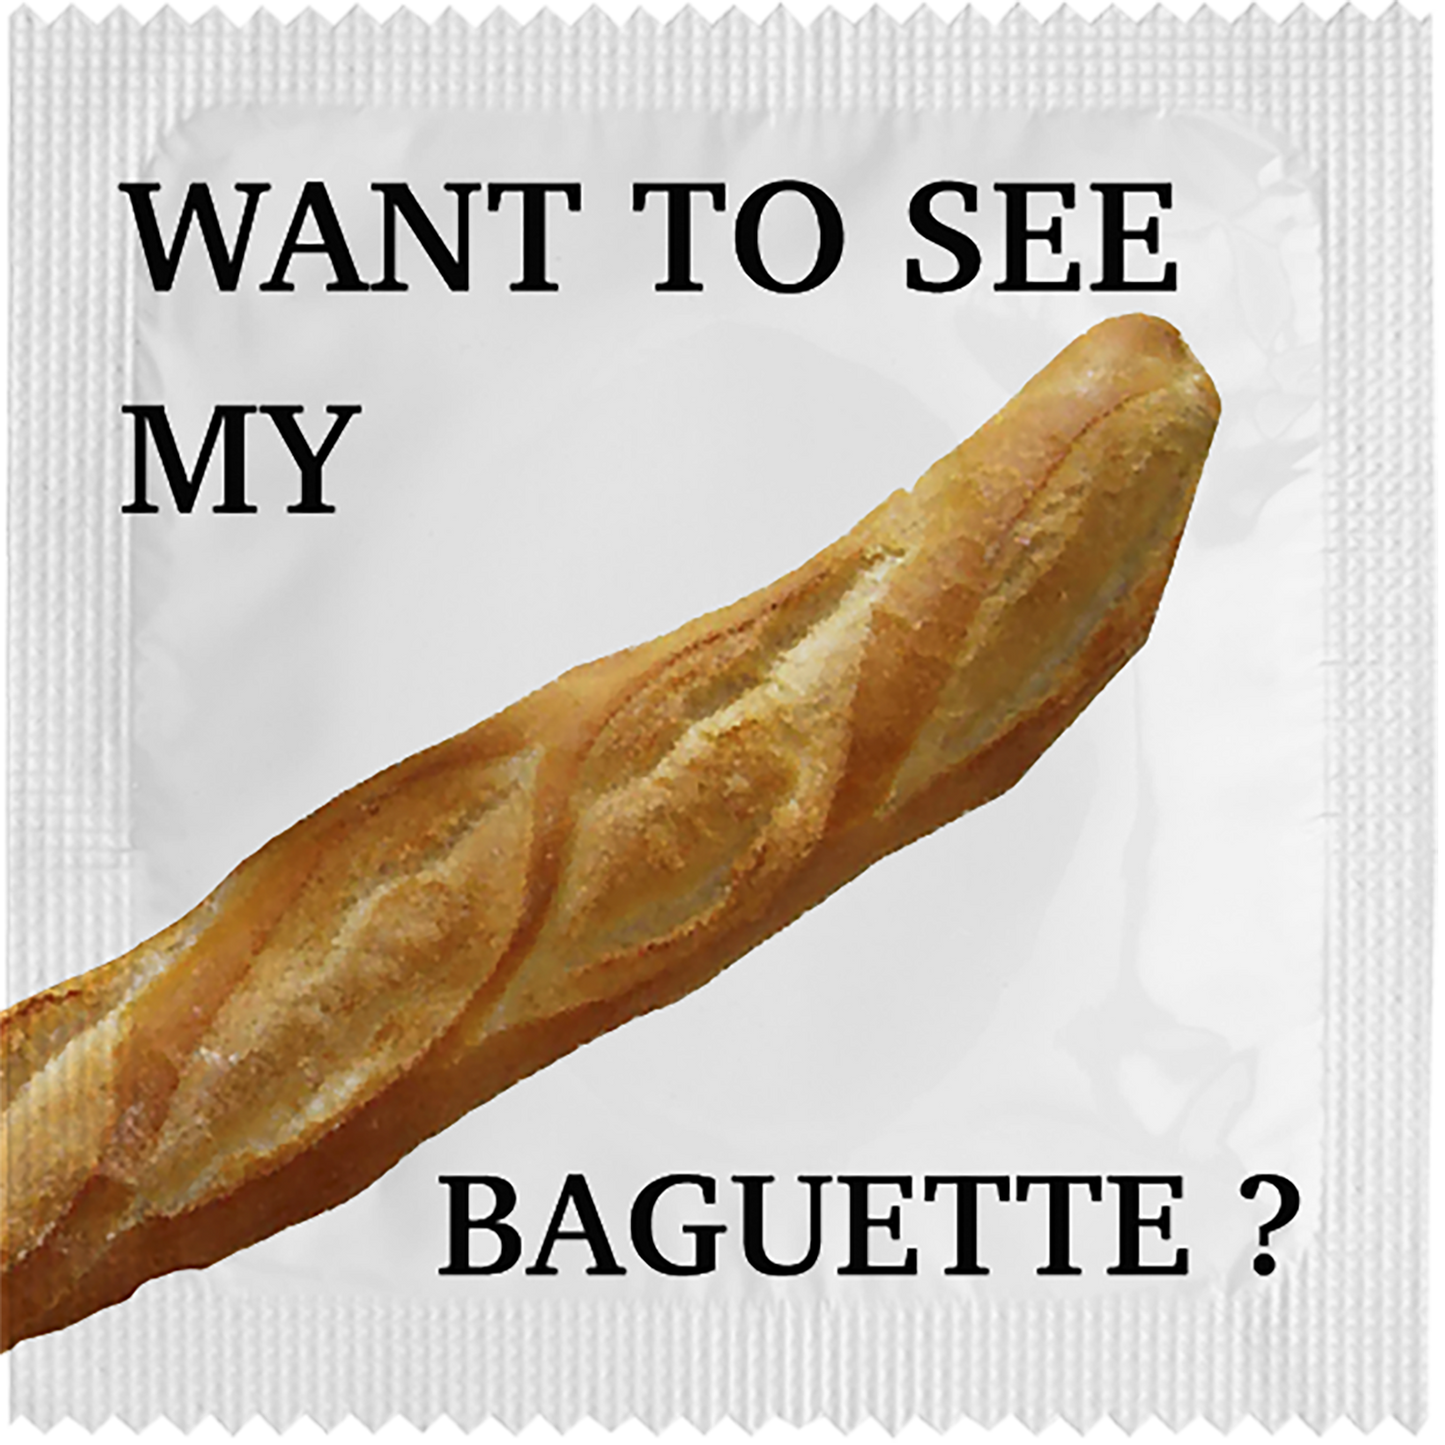 Image of funny condom "Want To See My Baguette"